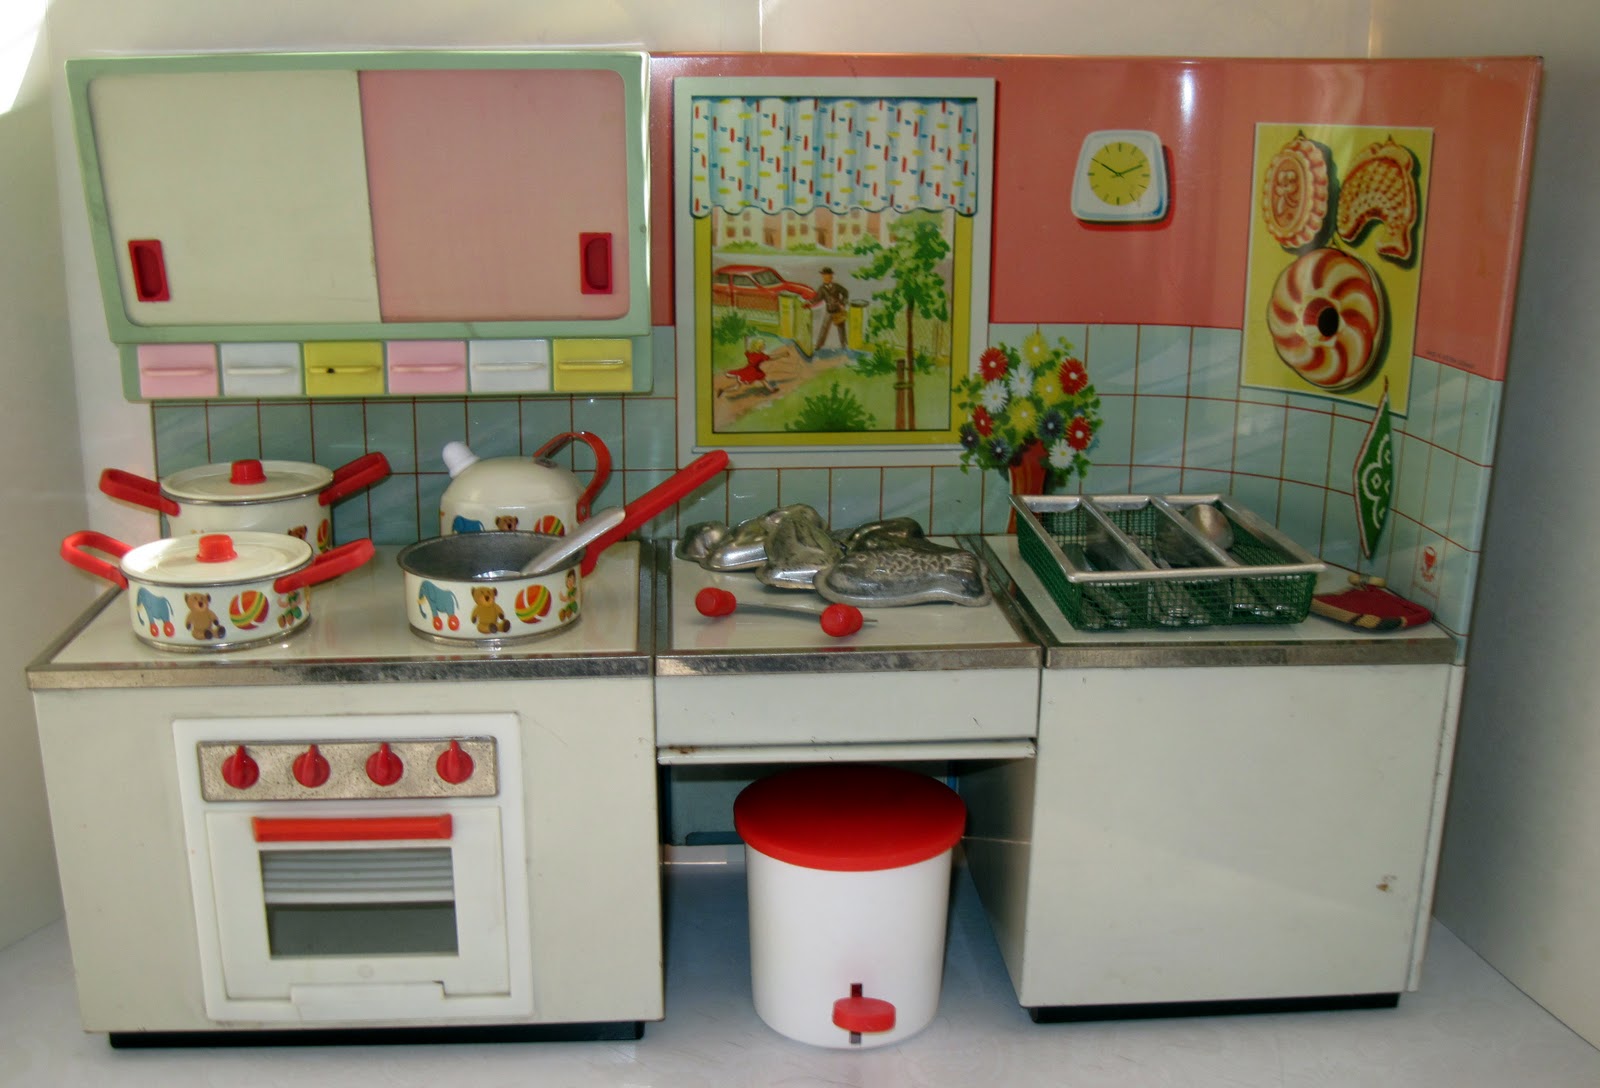 Tracys Toys And Some Other Stuff 1950s German Kitchen Playset